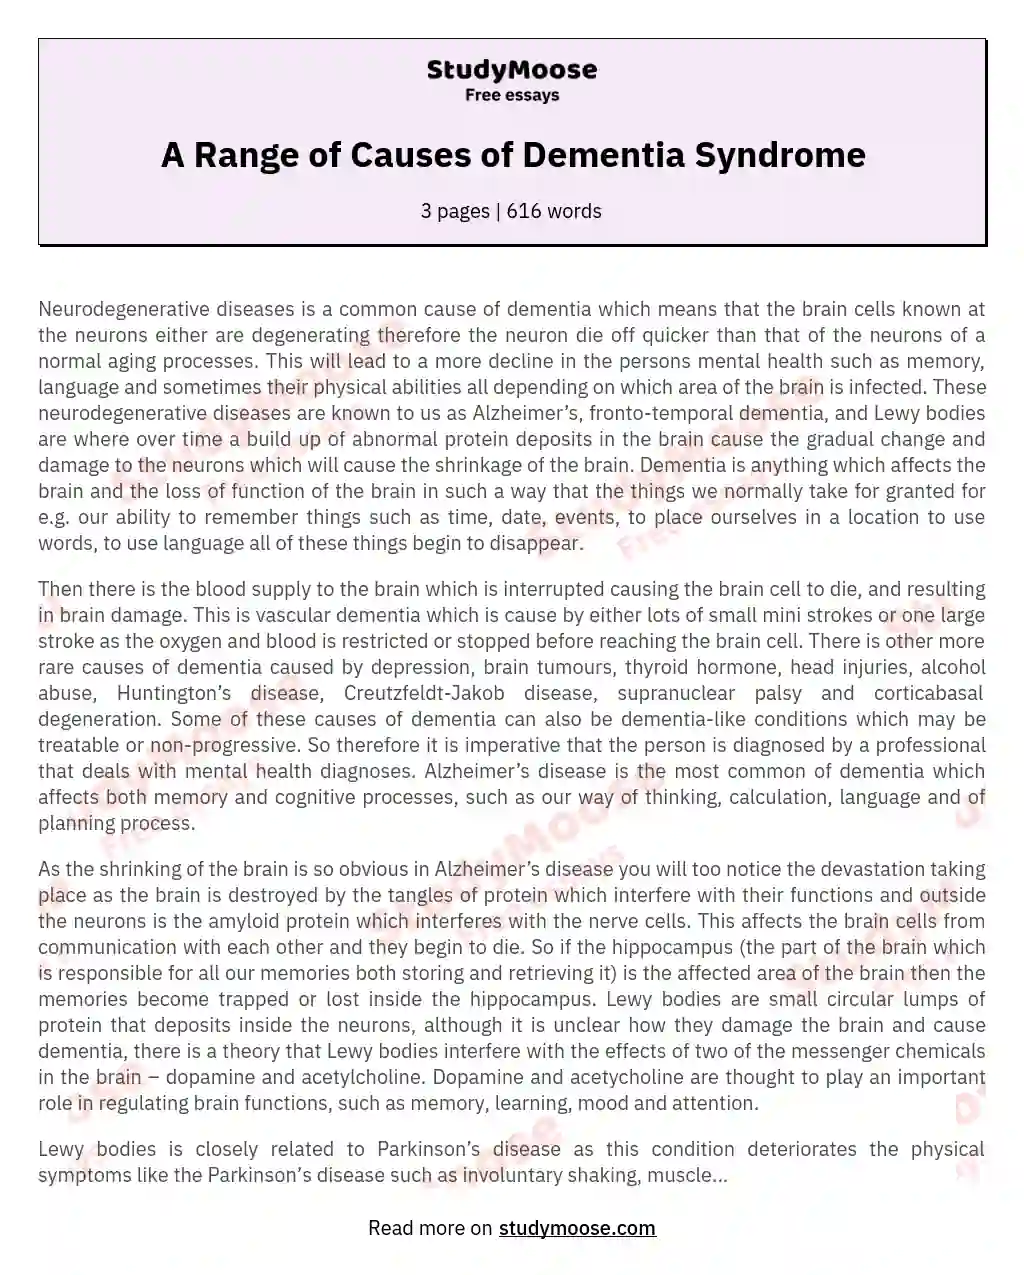 A Range of Causes of Dementia Syndrome essay